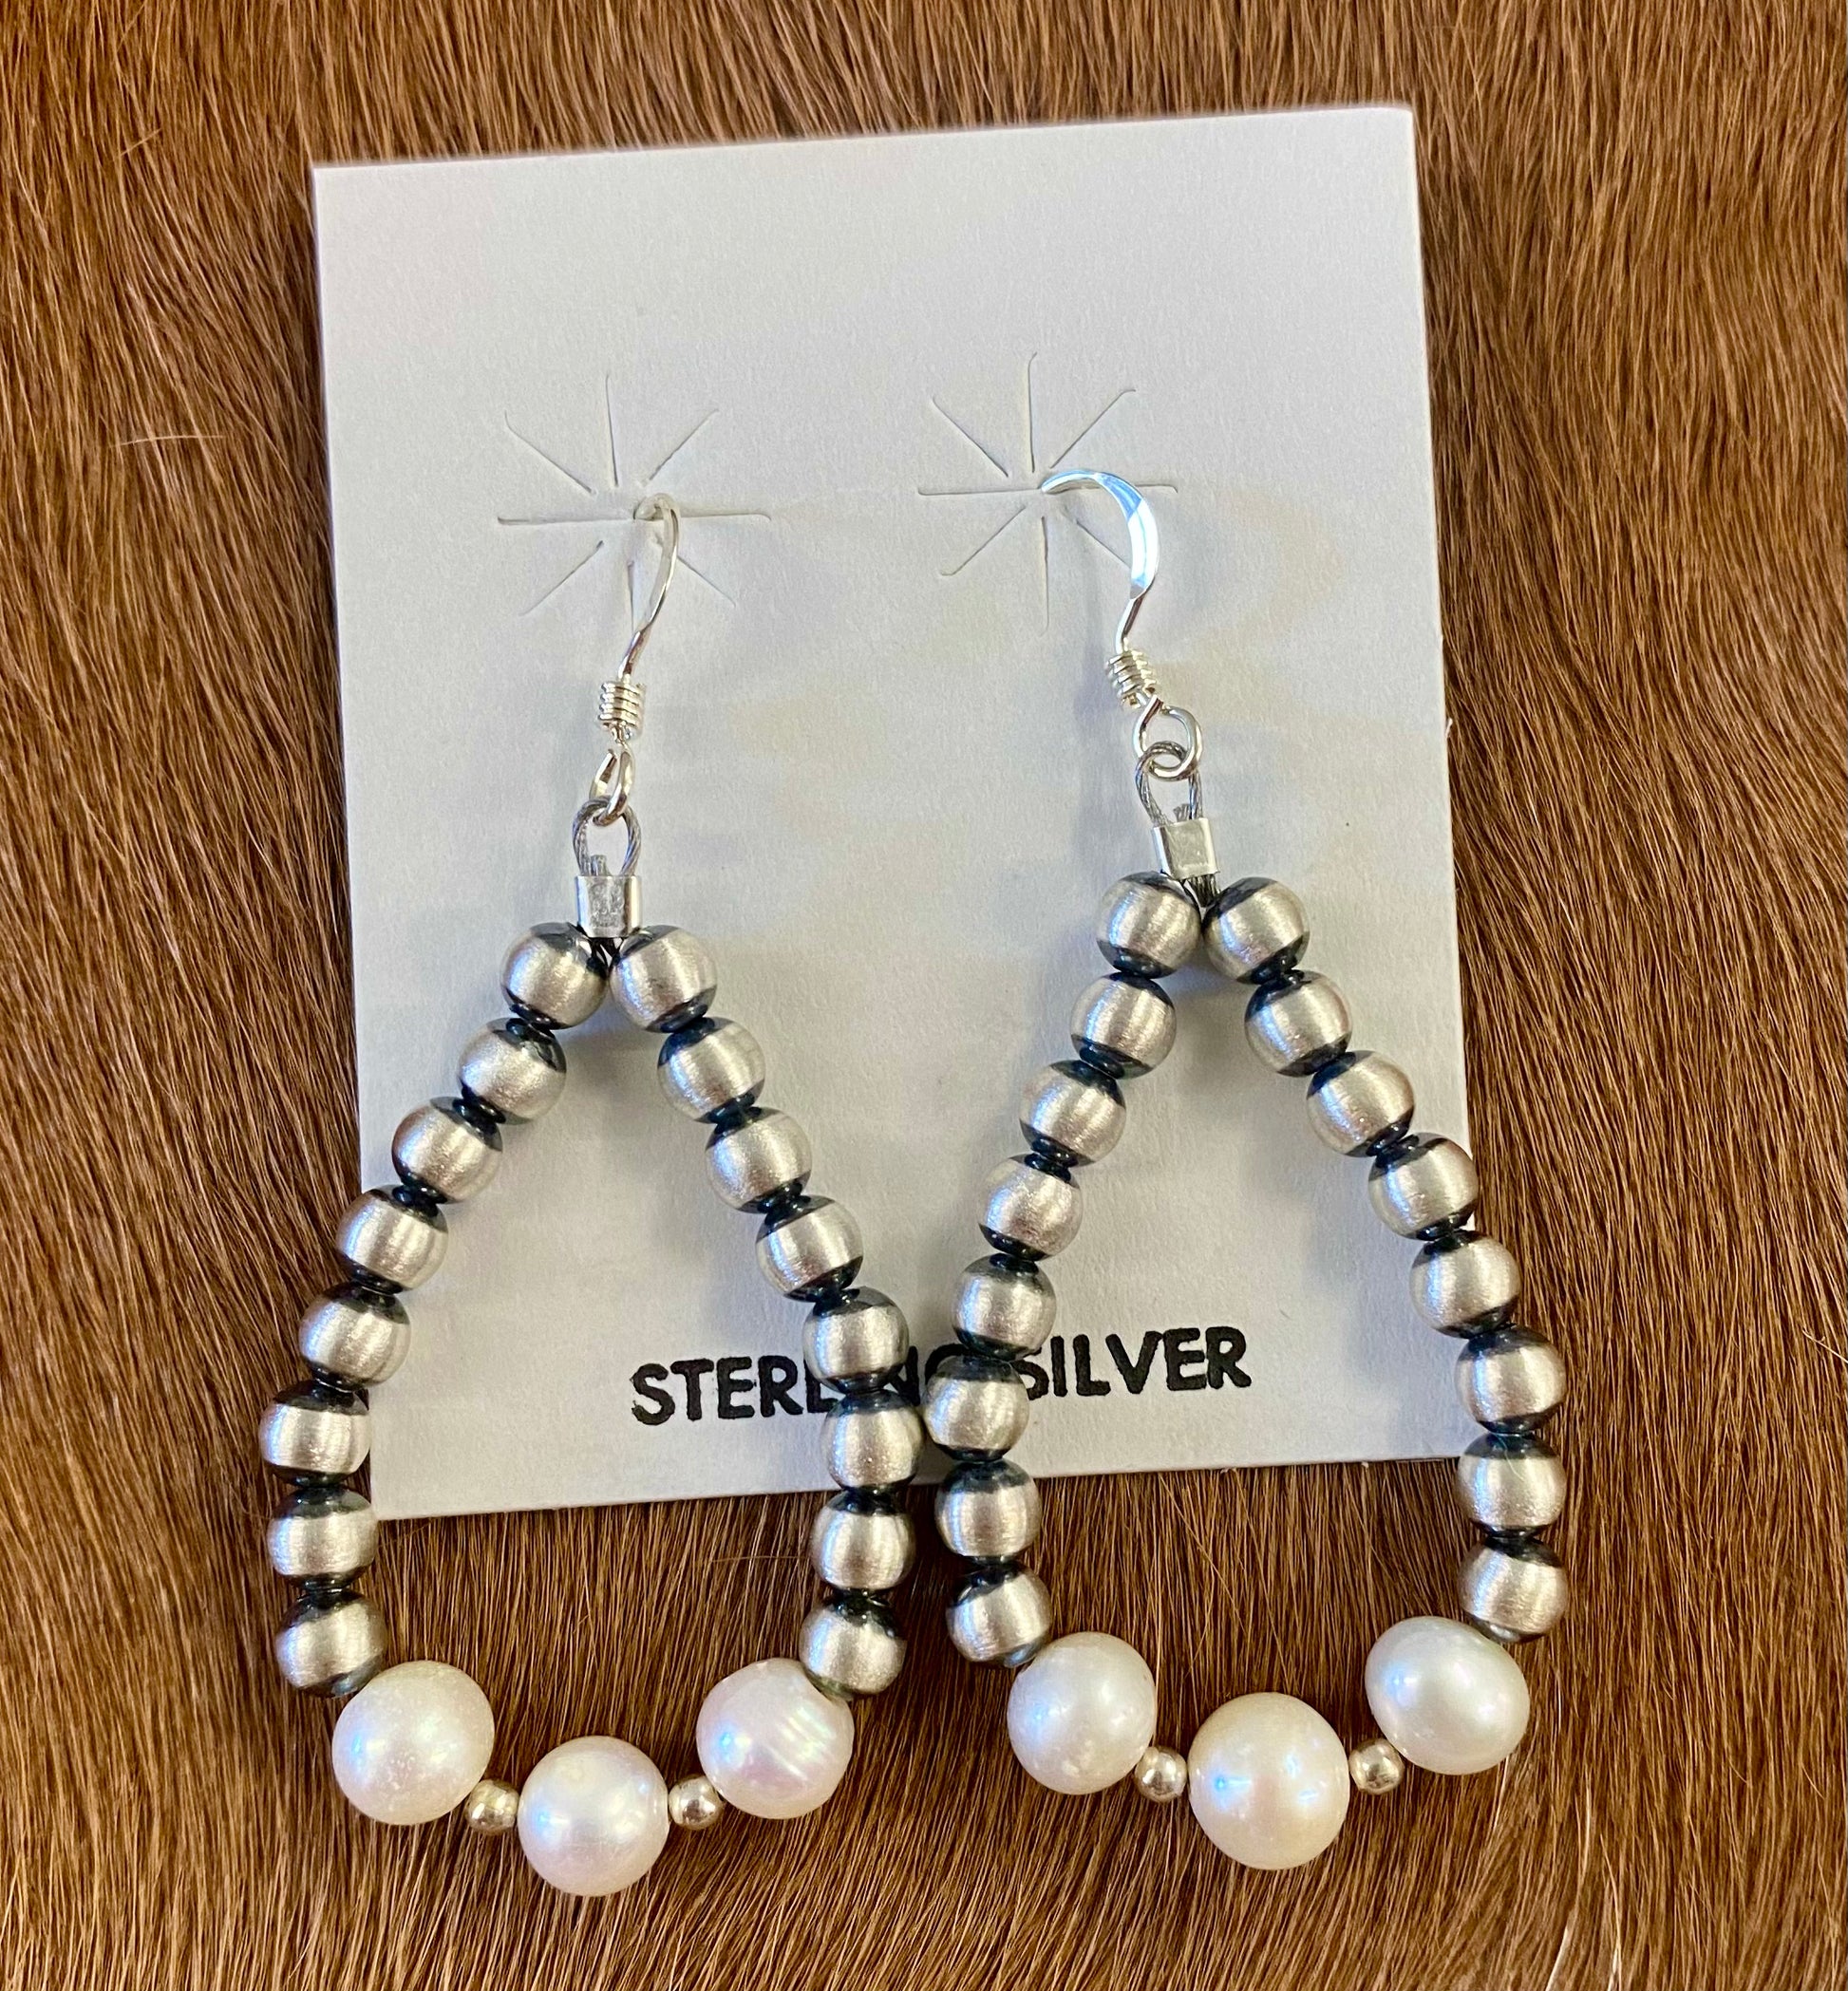 ﻿Gorgeous lightweight hand strung navajo pearl teardrop sterling silver earrings with white beads. The perfect earrings to add to anyone's jewelry collection. These Navajo pearl style teardrop earrings are hand strung together. Each of the sterling components are soldered closed to ensure durability and peace of mind.  Size: 1.5” inches length x 1” inch width 